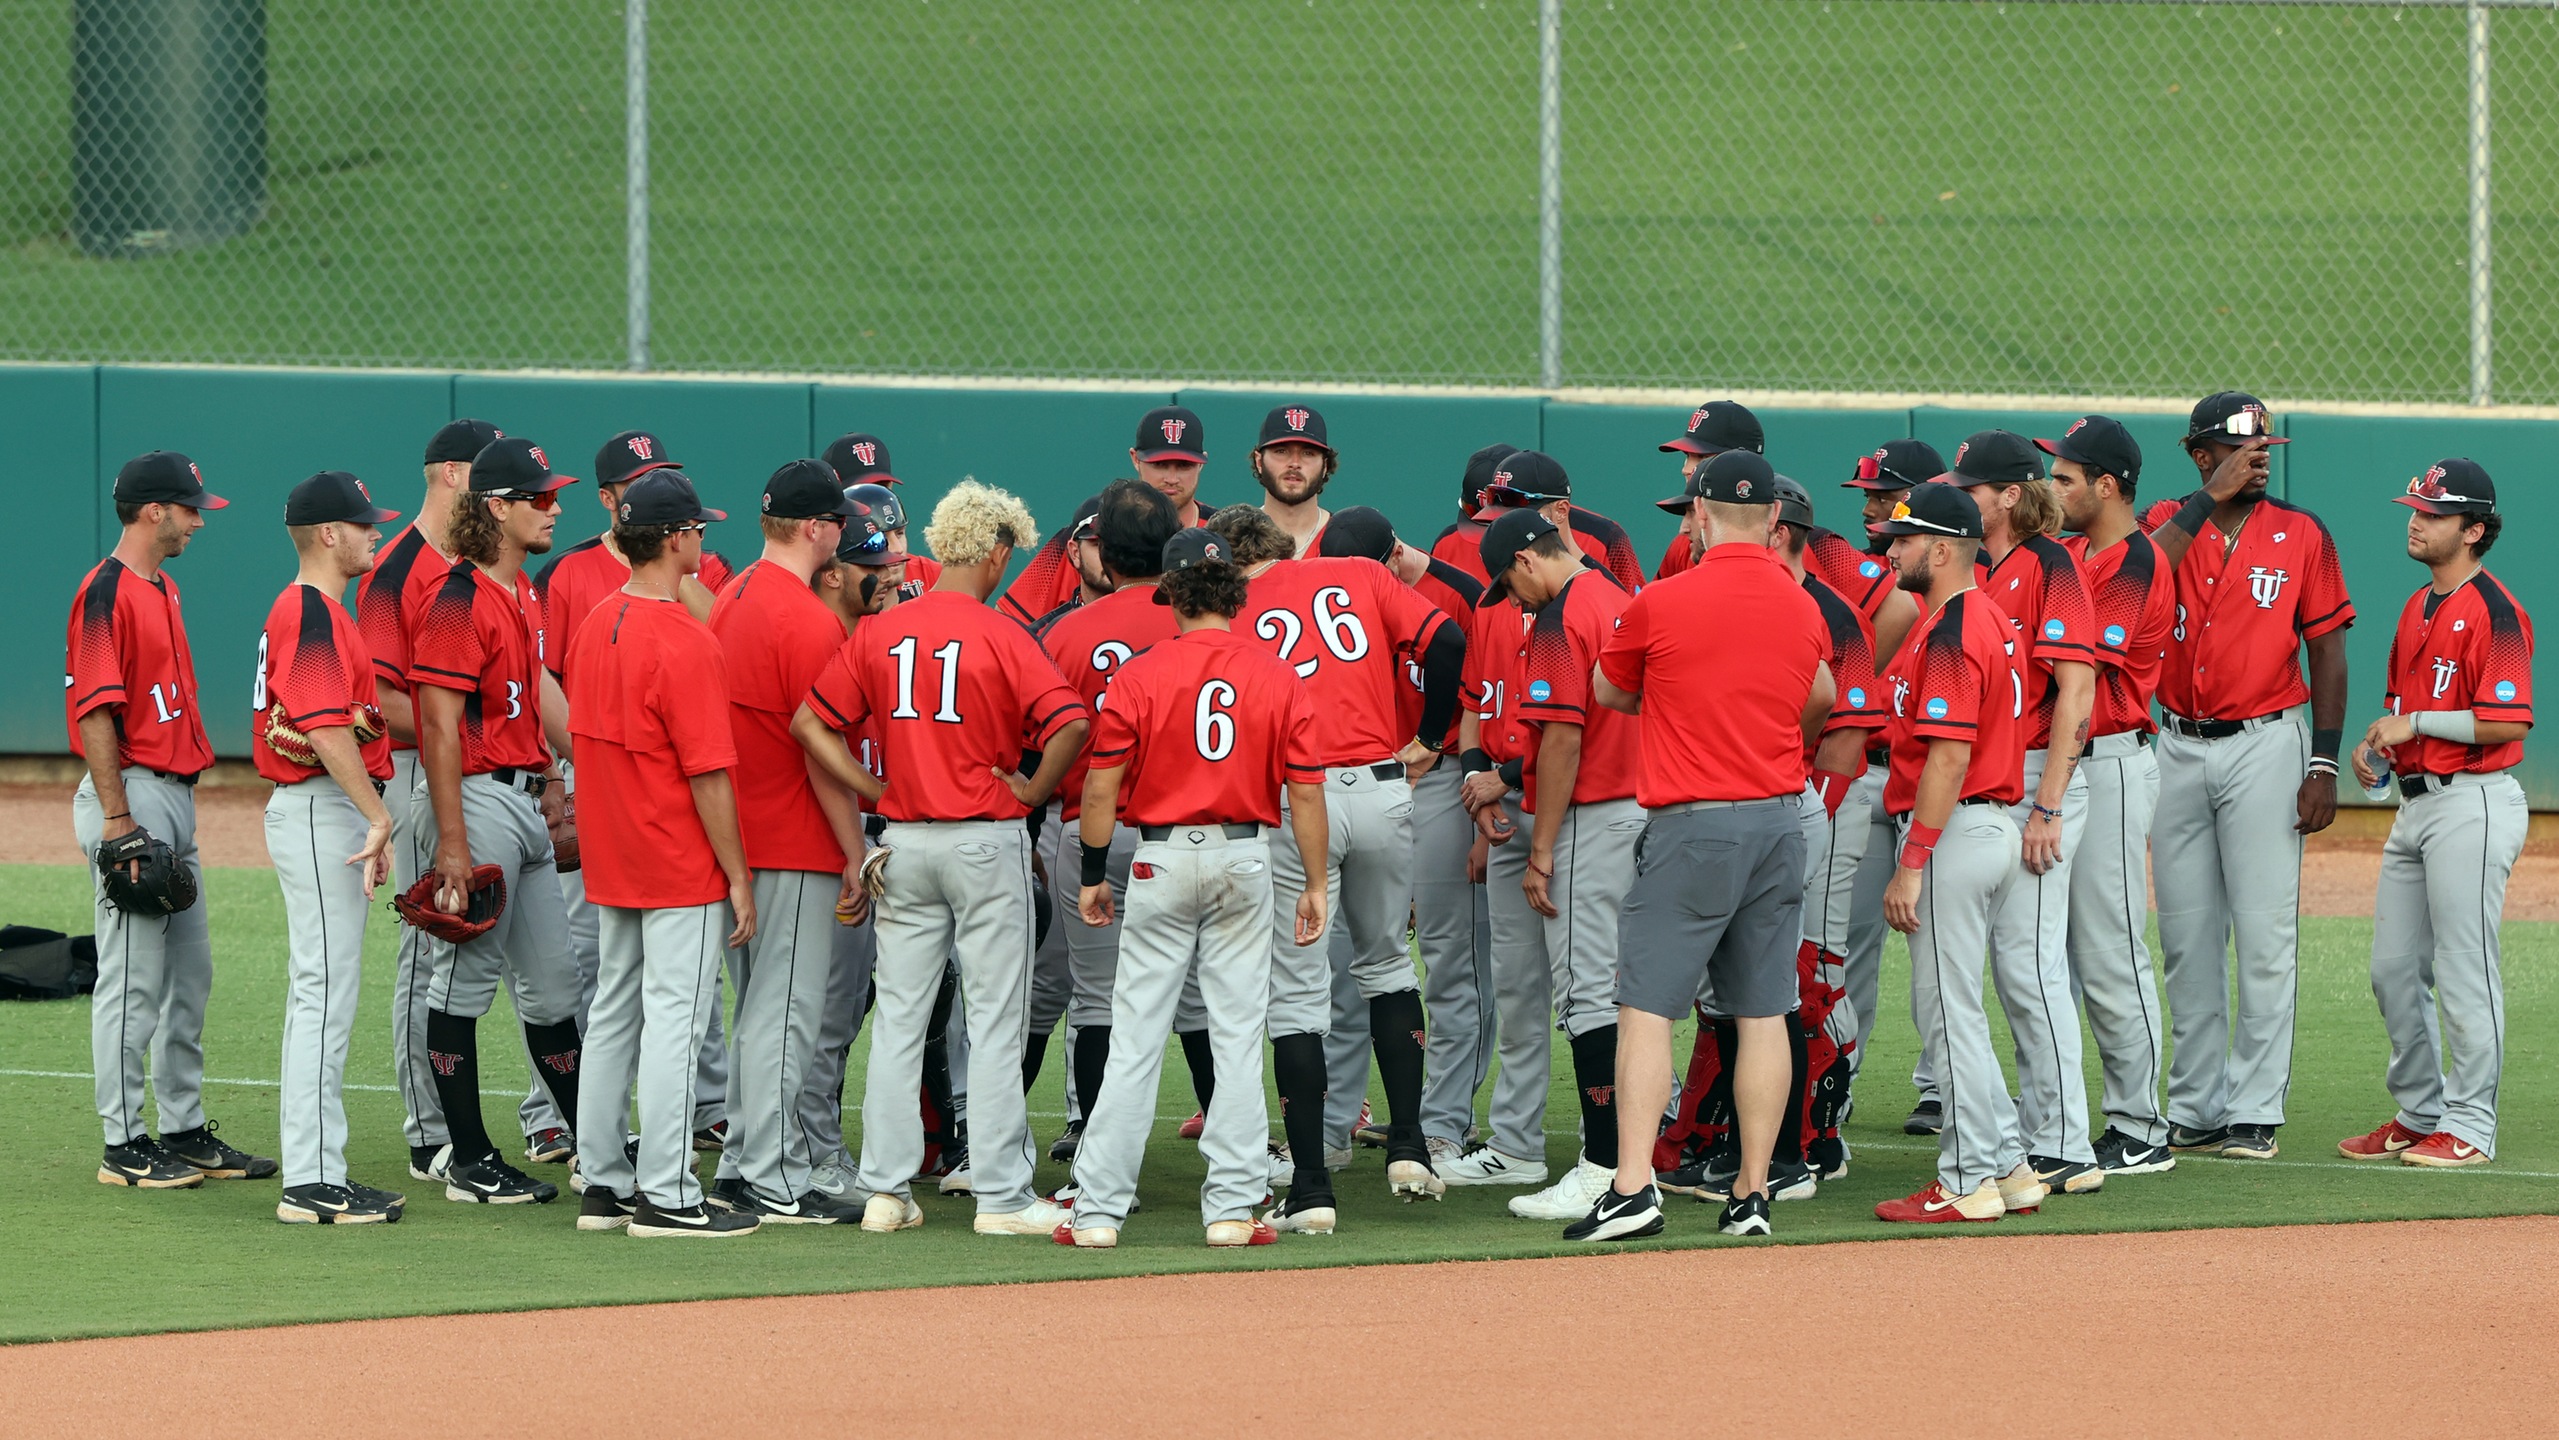 The University of Tampa Spartans baseball team.